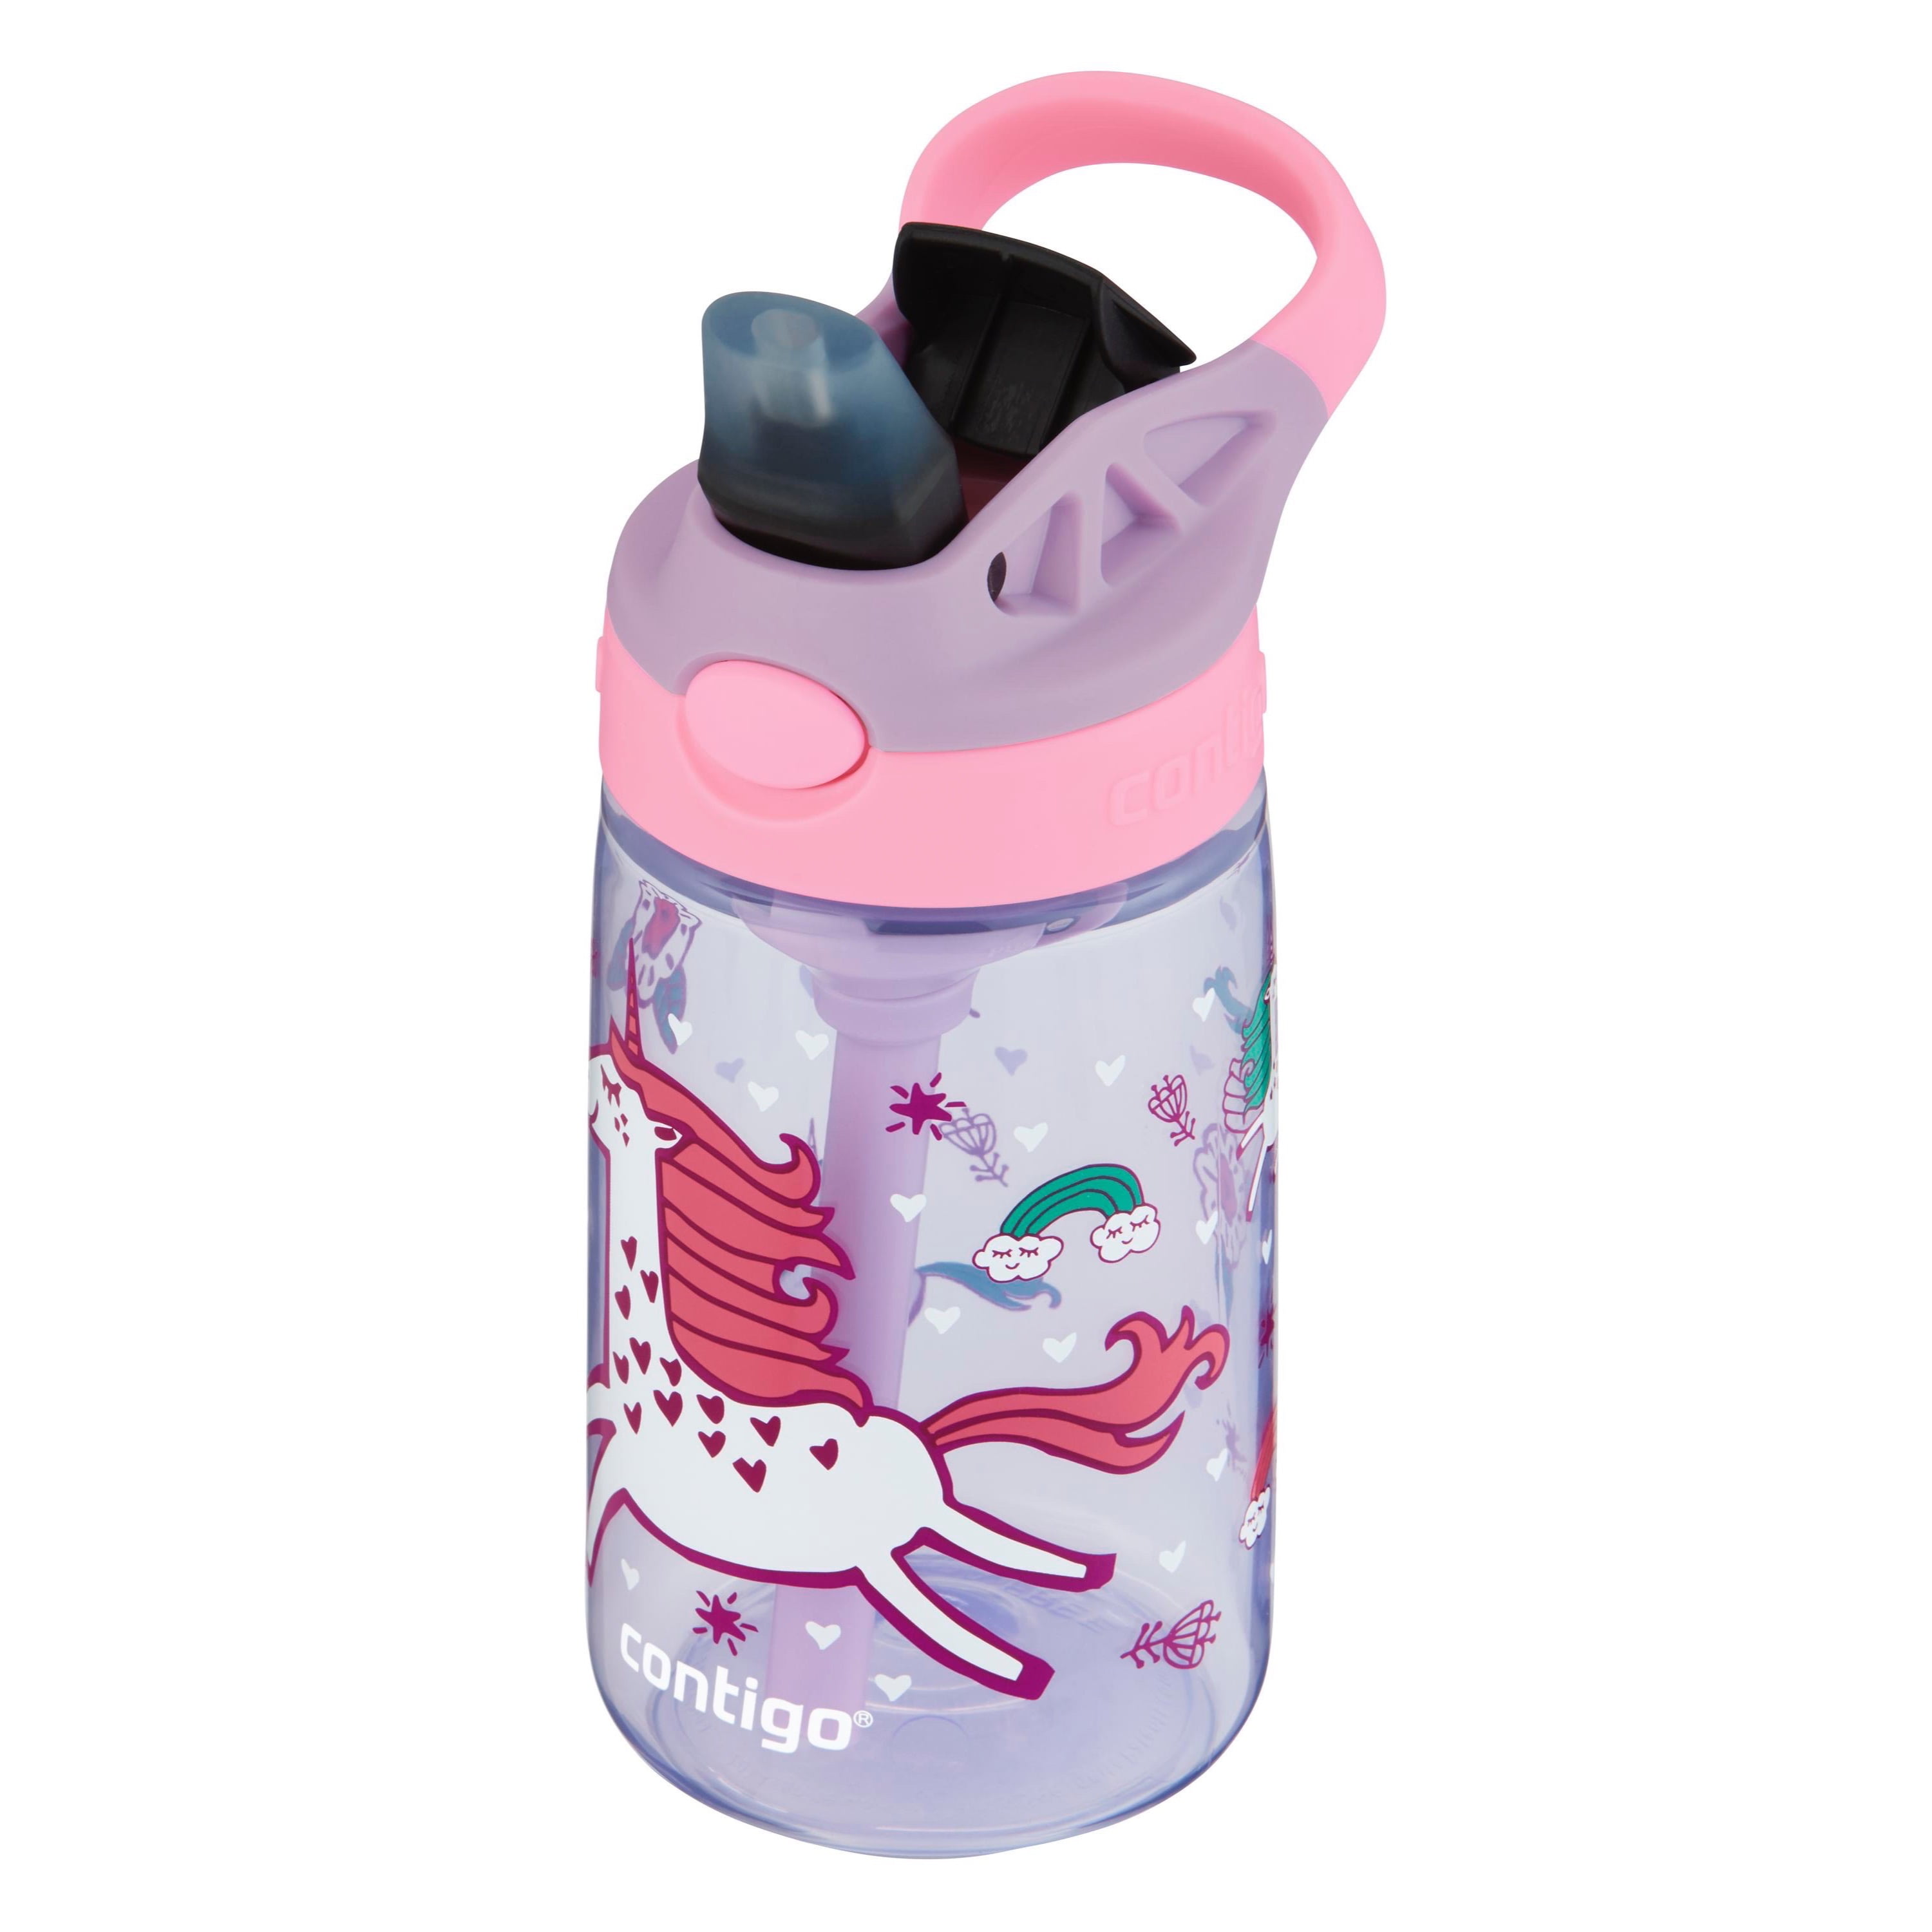 Contigo Kids Water Bottle with Redesigned AUTOSPOUT Straw Lid Purple  Eggplant and Mermaids, 14 fl oz. 